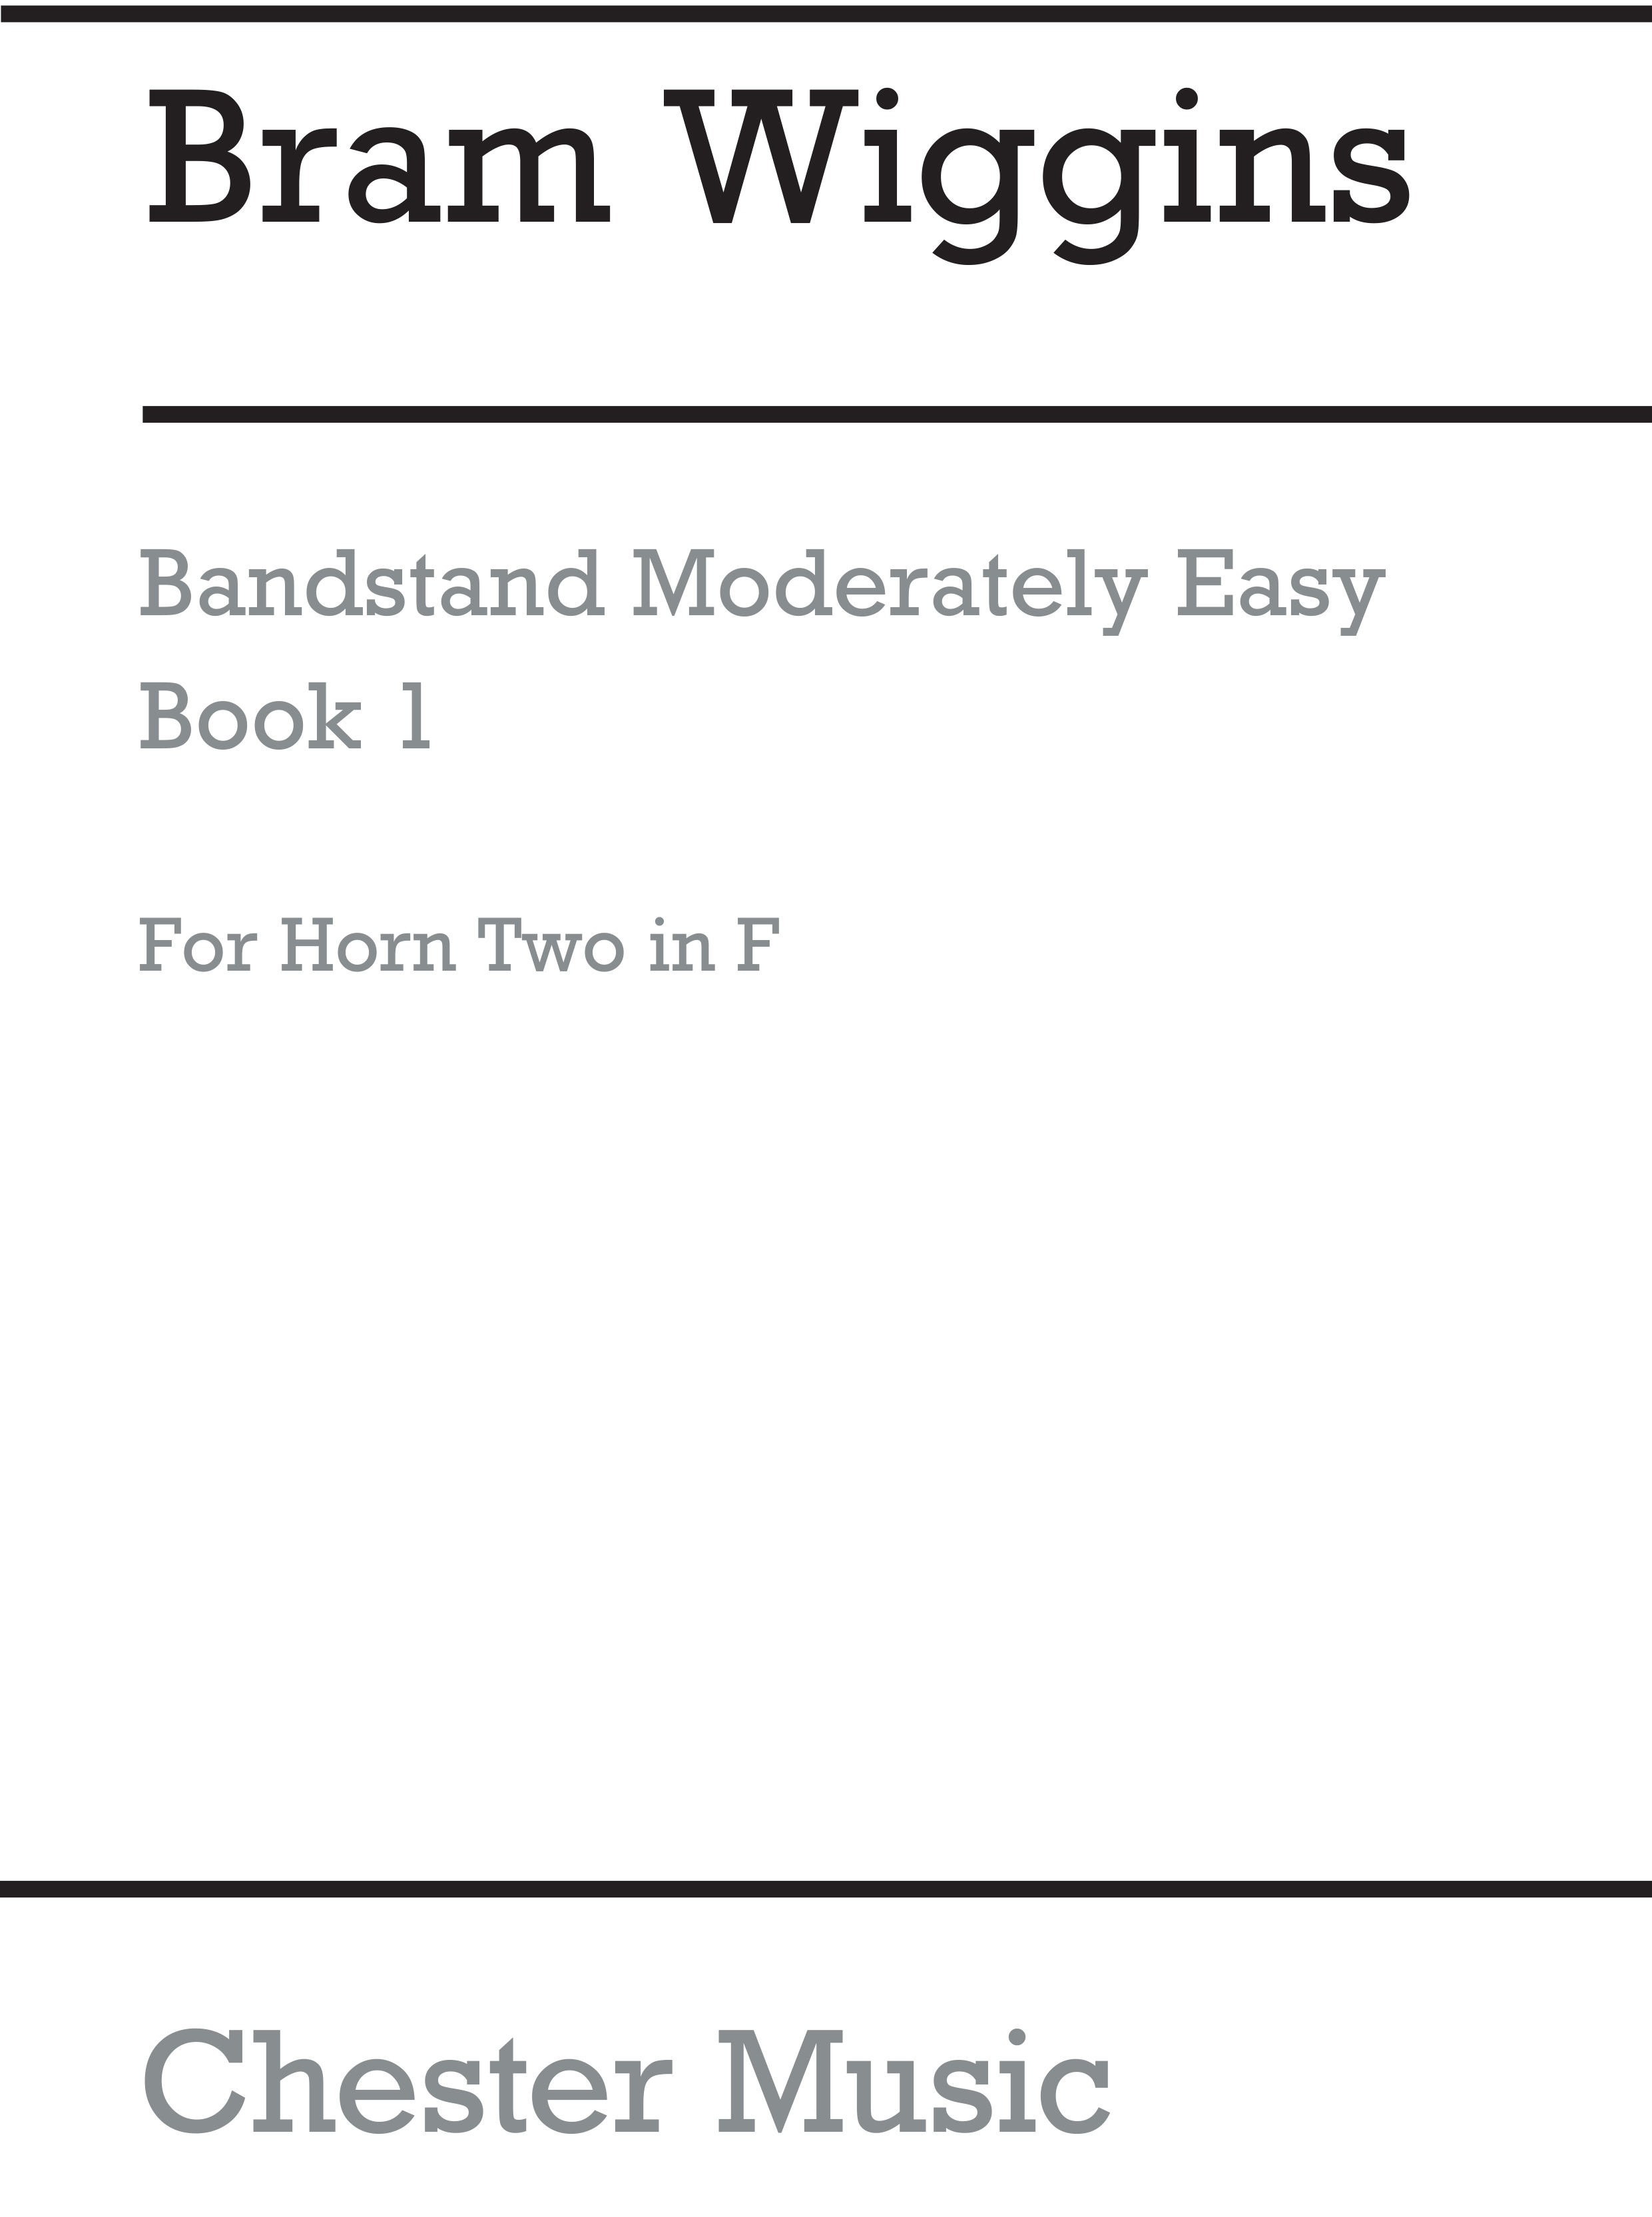 Bram Wiggins: Bandstand Moderately Easy Book 1 (Horn 2 in F): Concert Band: Part